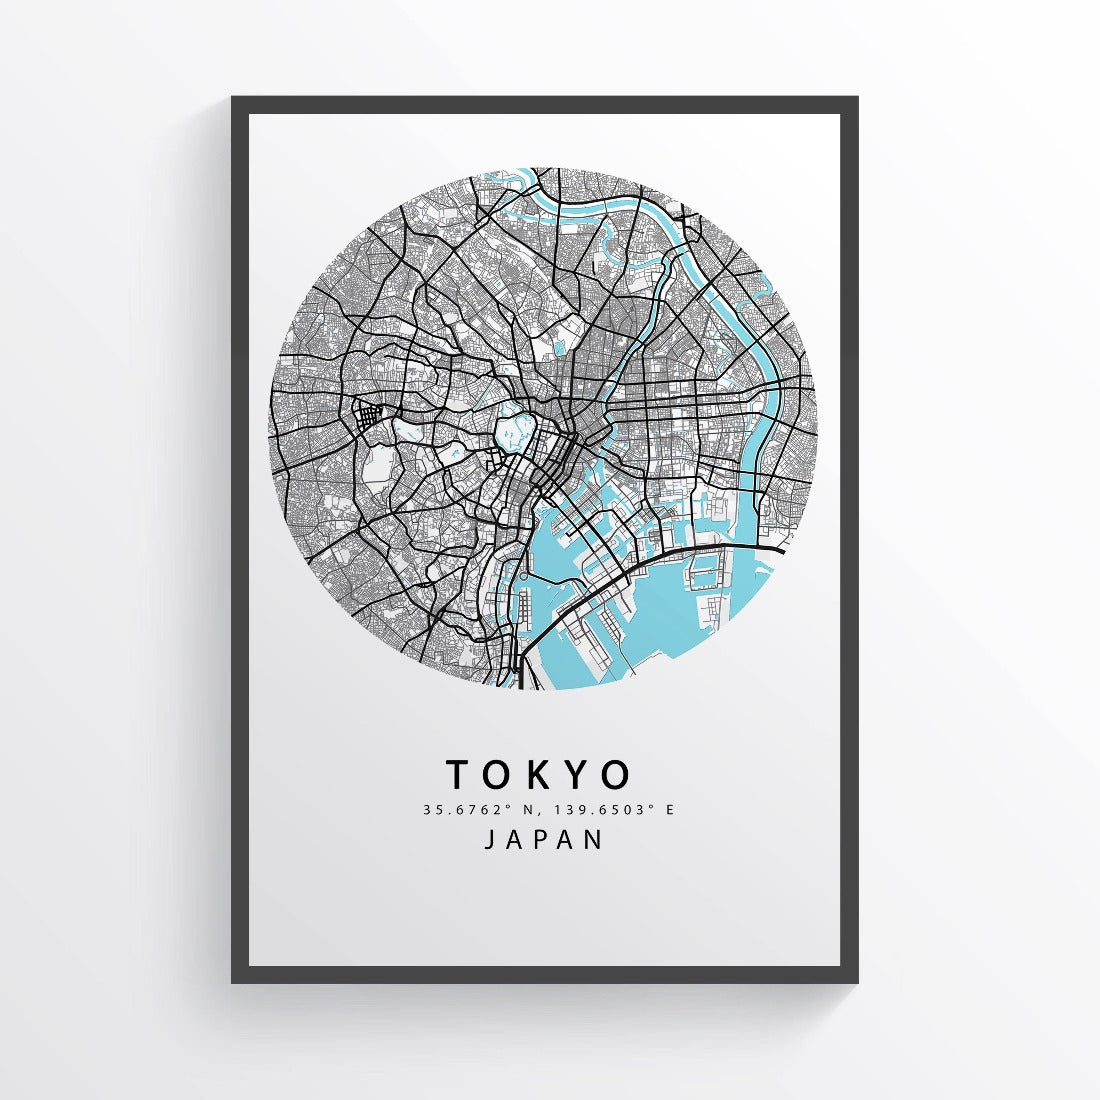 If you have ever dreamed of traveling to Japan, here's your chance to take a sneak peak. This Tokyo City Map print is the perfect way to explore Japan's capital city. The intricate details and vibrant colors make this print a true work of art. From the bright lights of Shinjuku to the peaceful gardens of the Imperial Palace, this map will take you on an amazing journey through Tokyo.- 98types